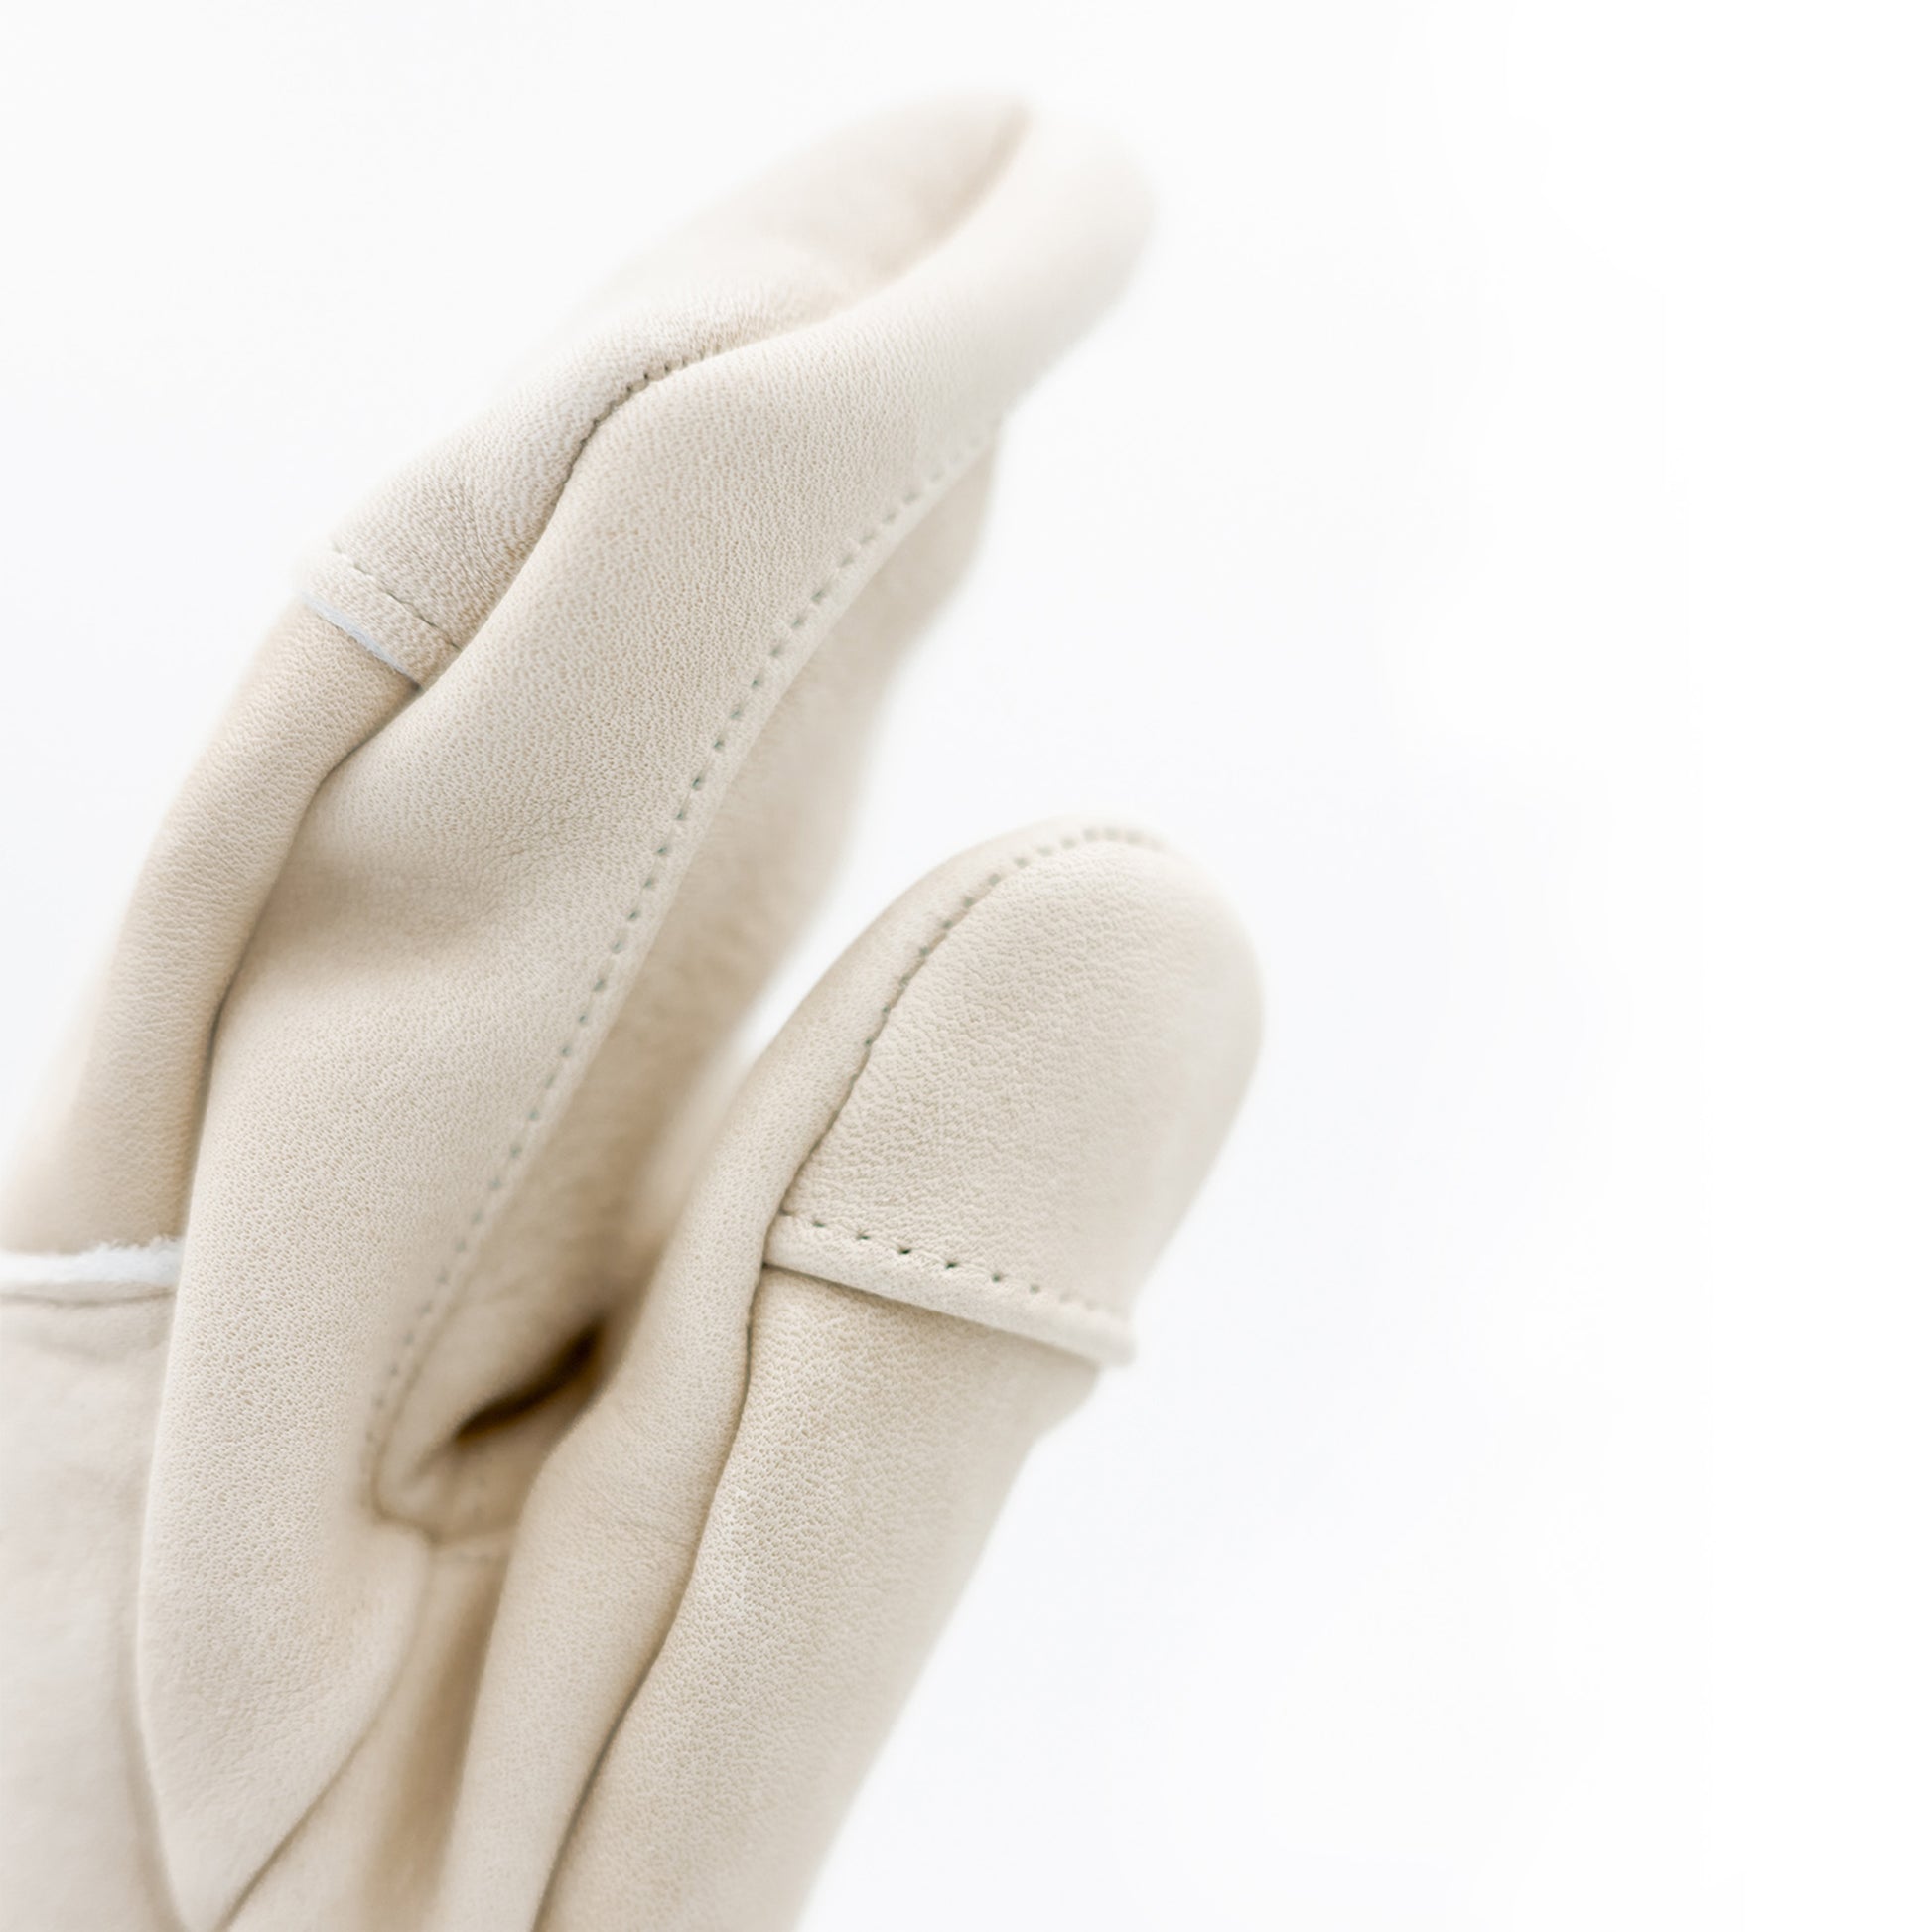 A pair of white leather Mainers Caribou Mitts on a white background, embodying Maine's spirit.